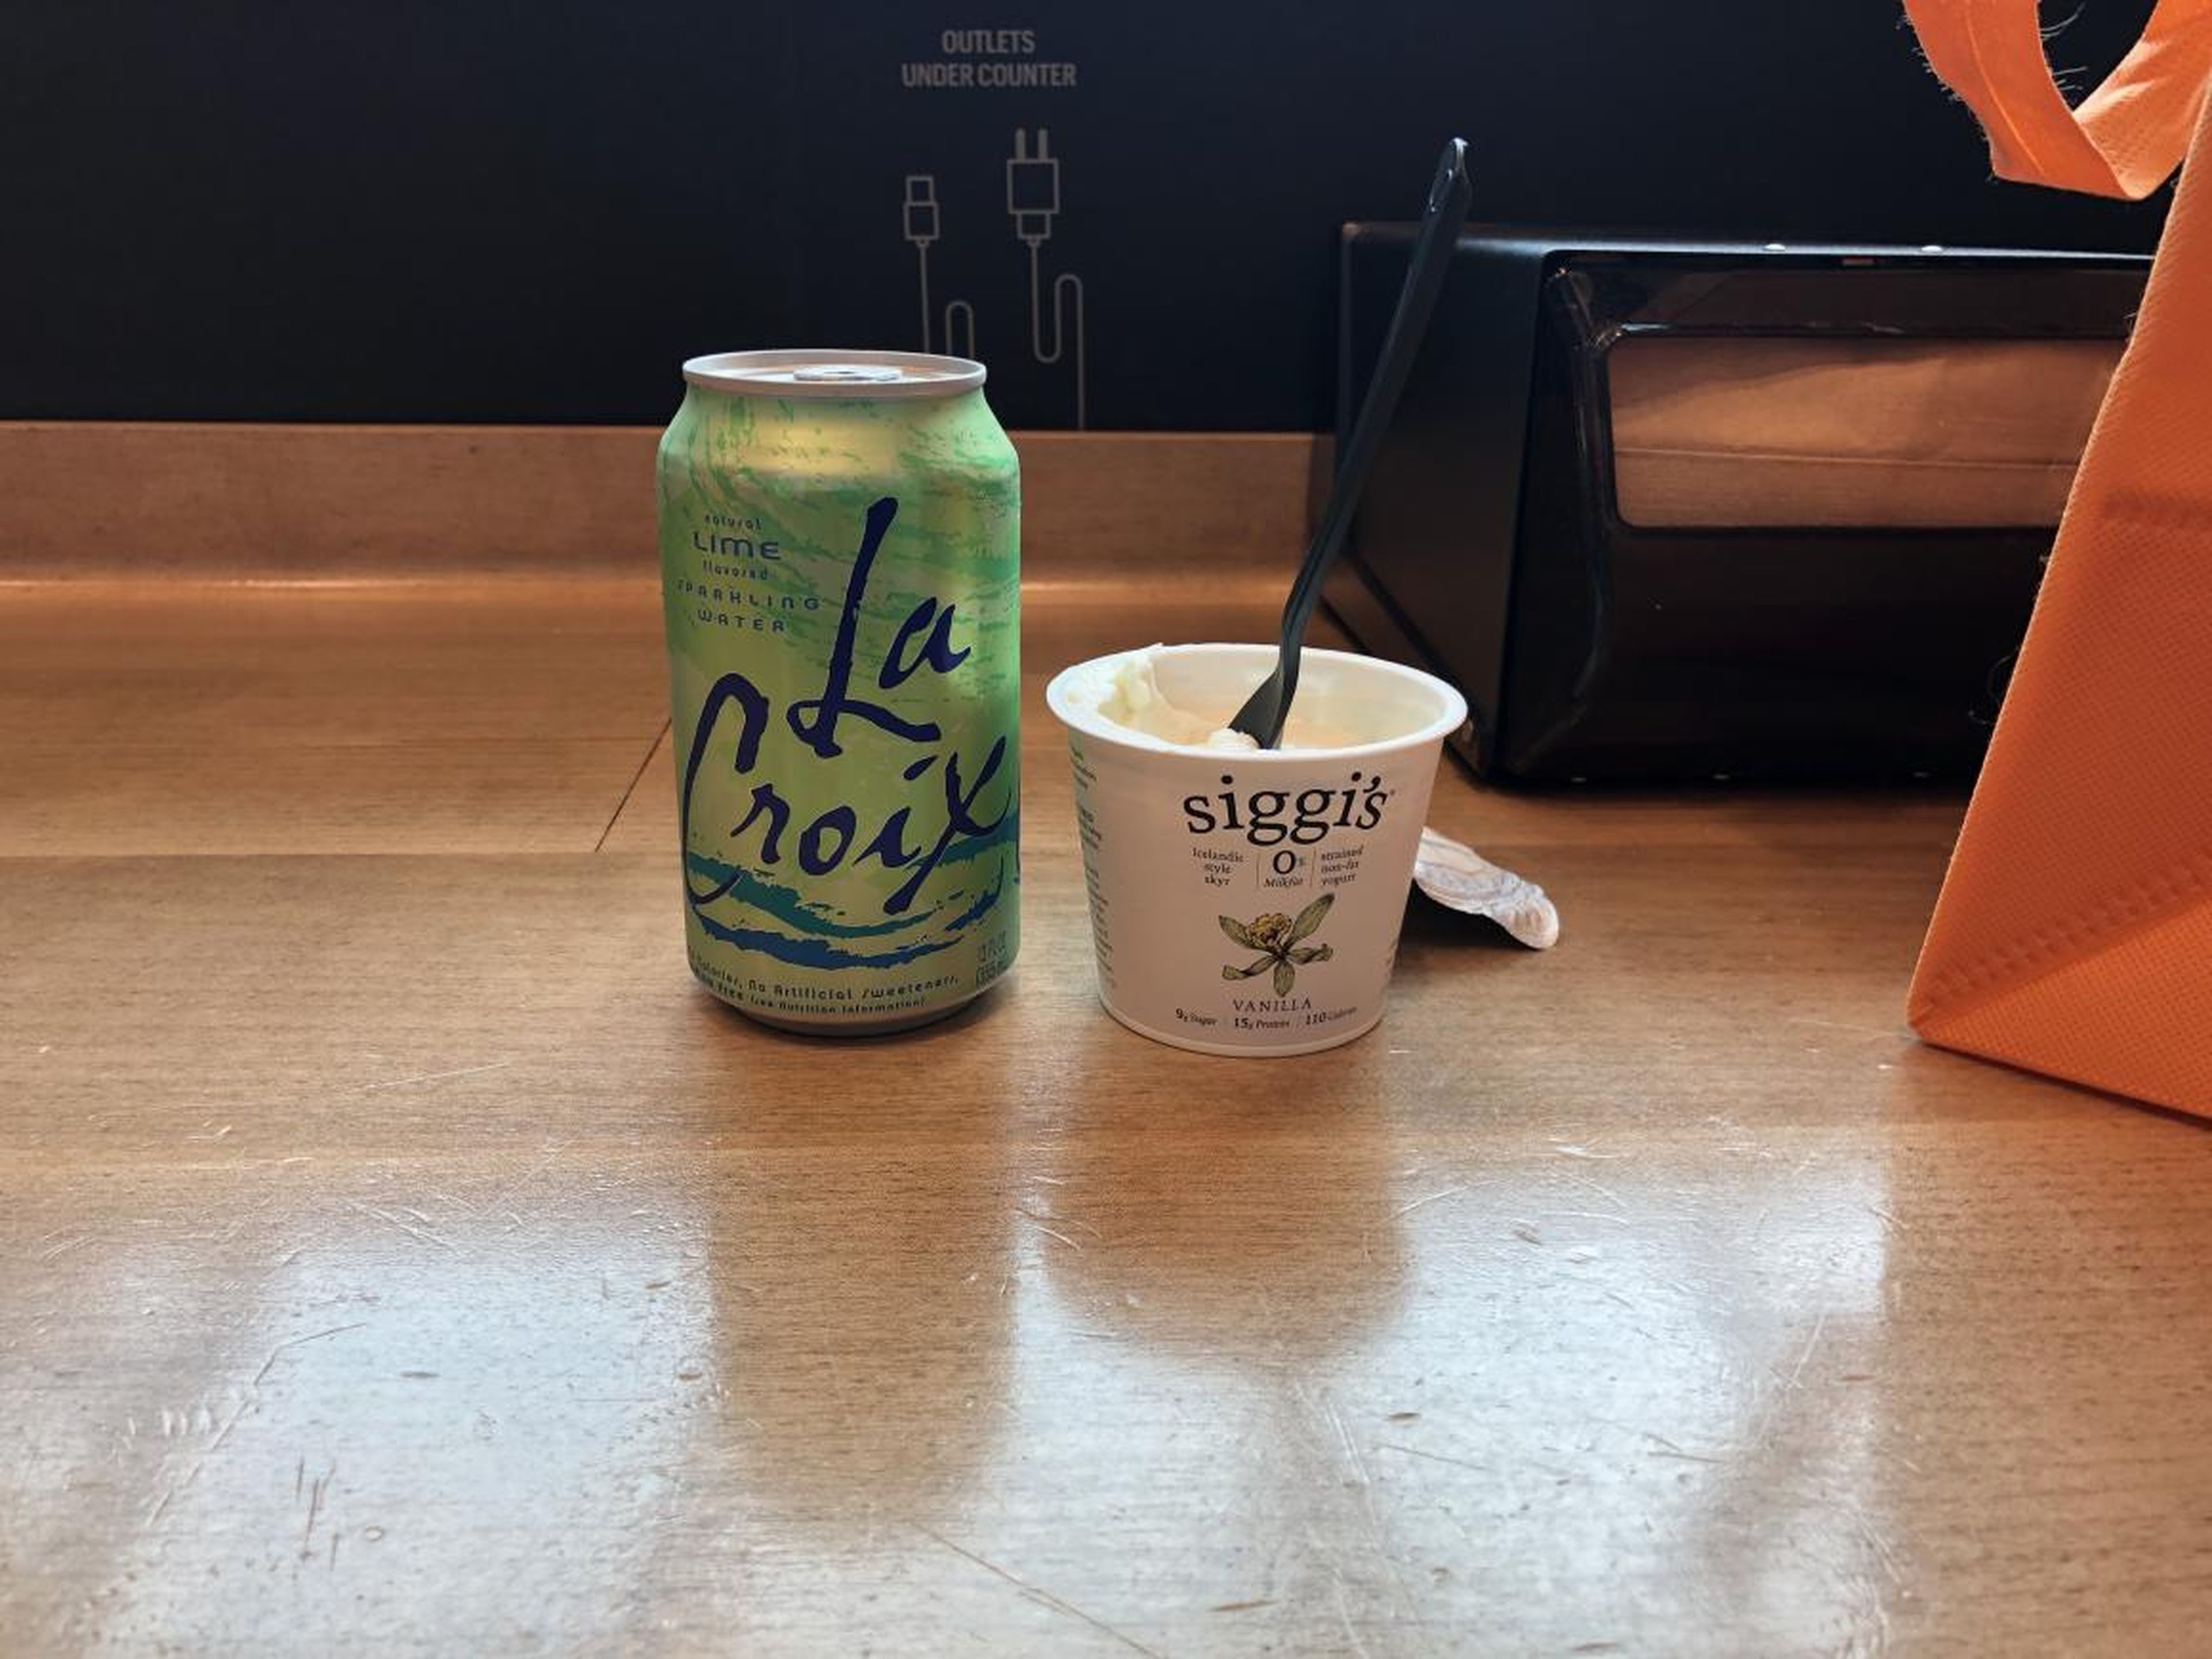 I didn't fool the system. It charged me for only my obligatory La Croix sparkling water and my yogurt.